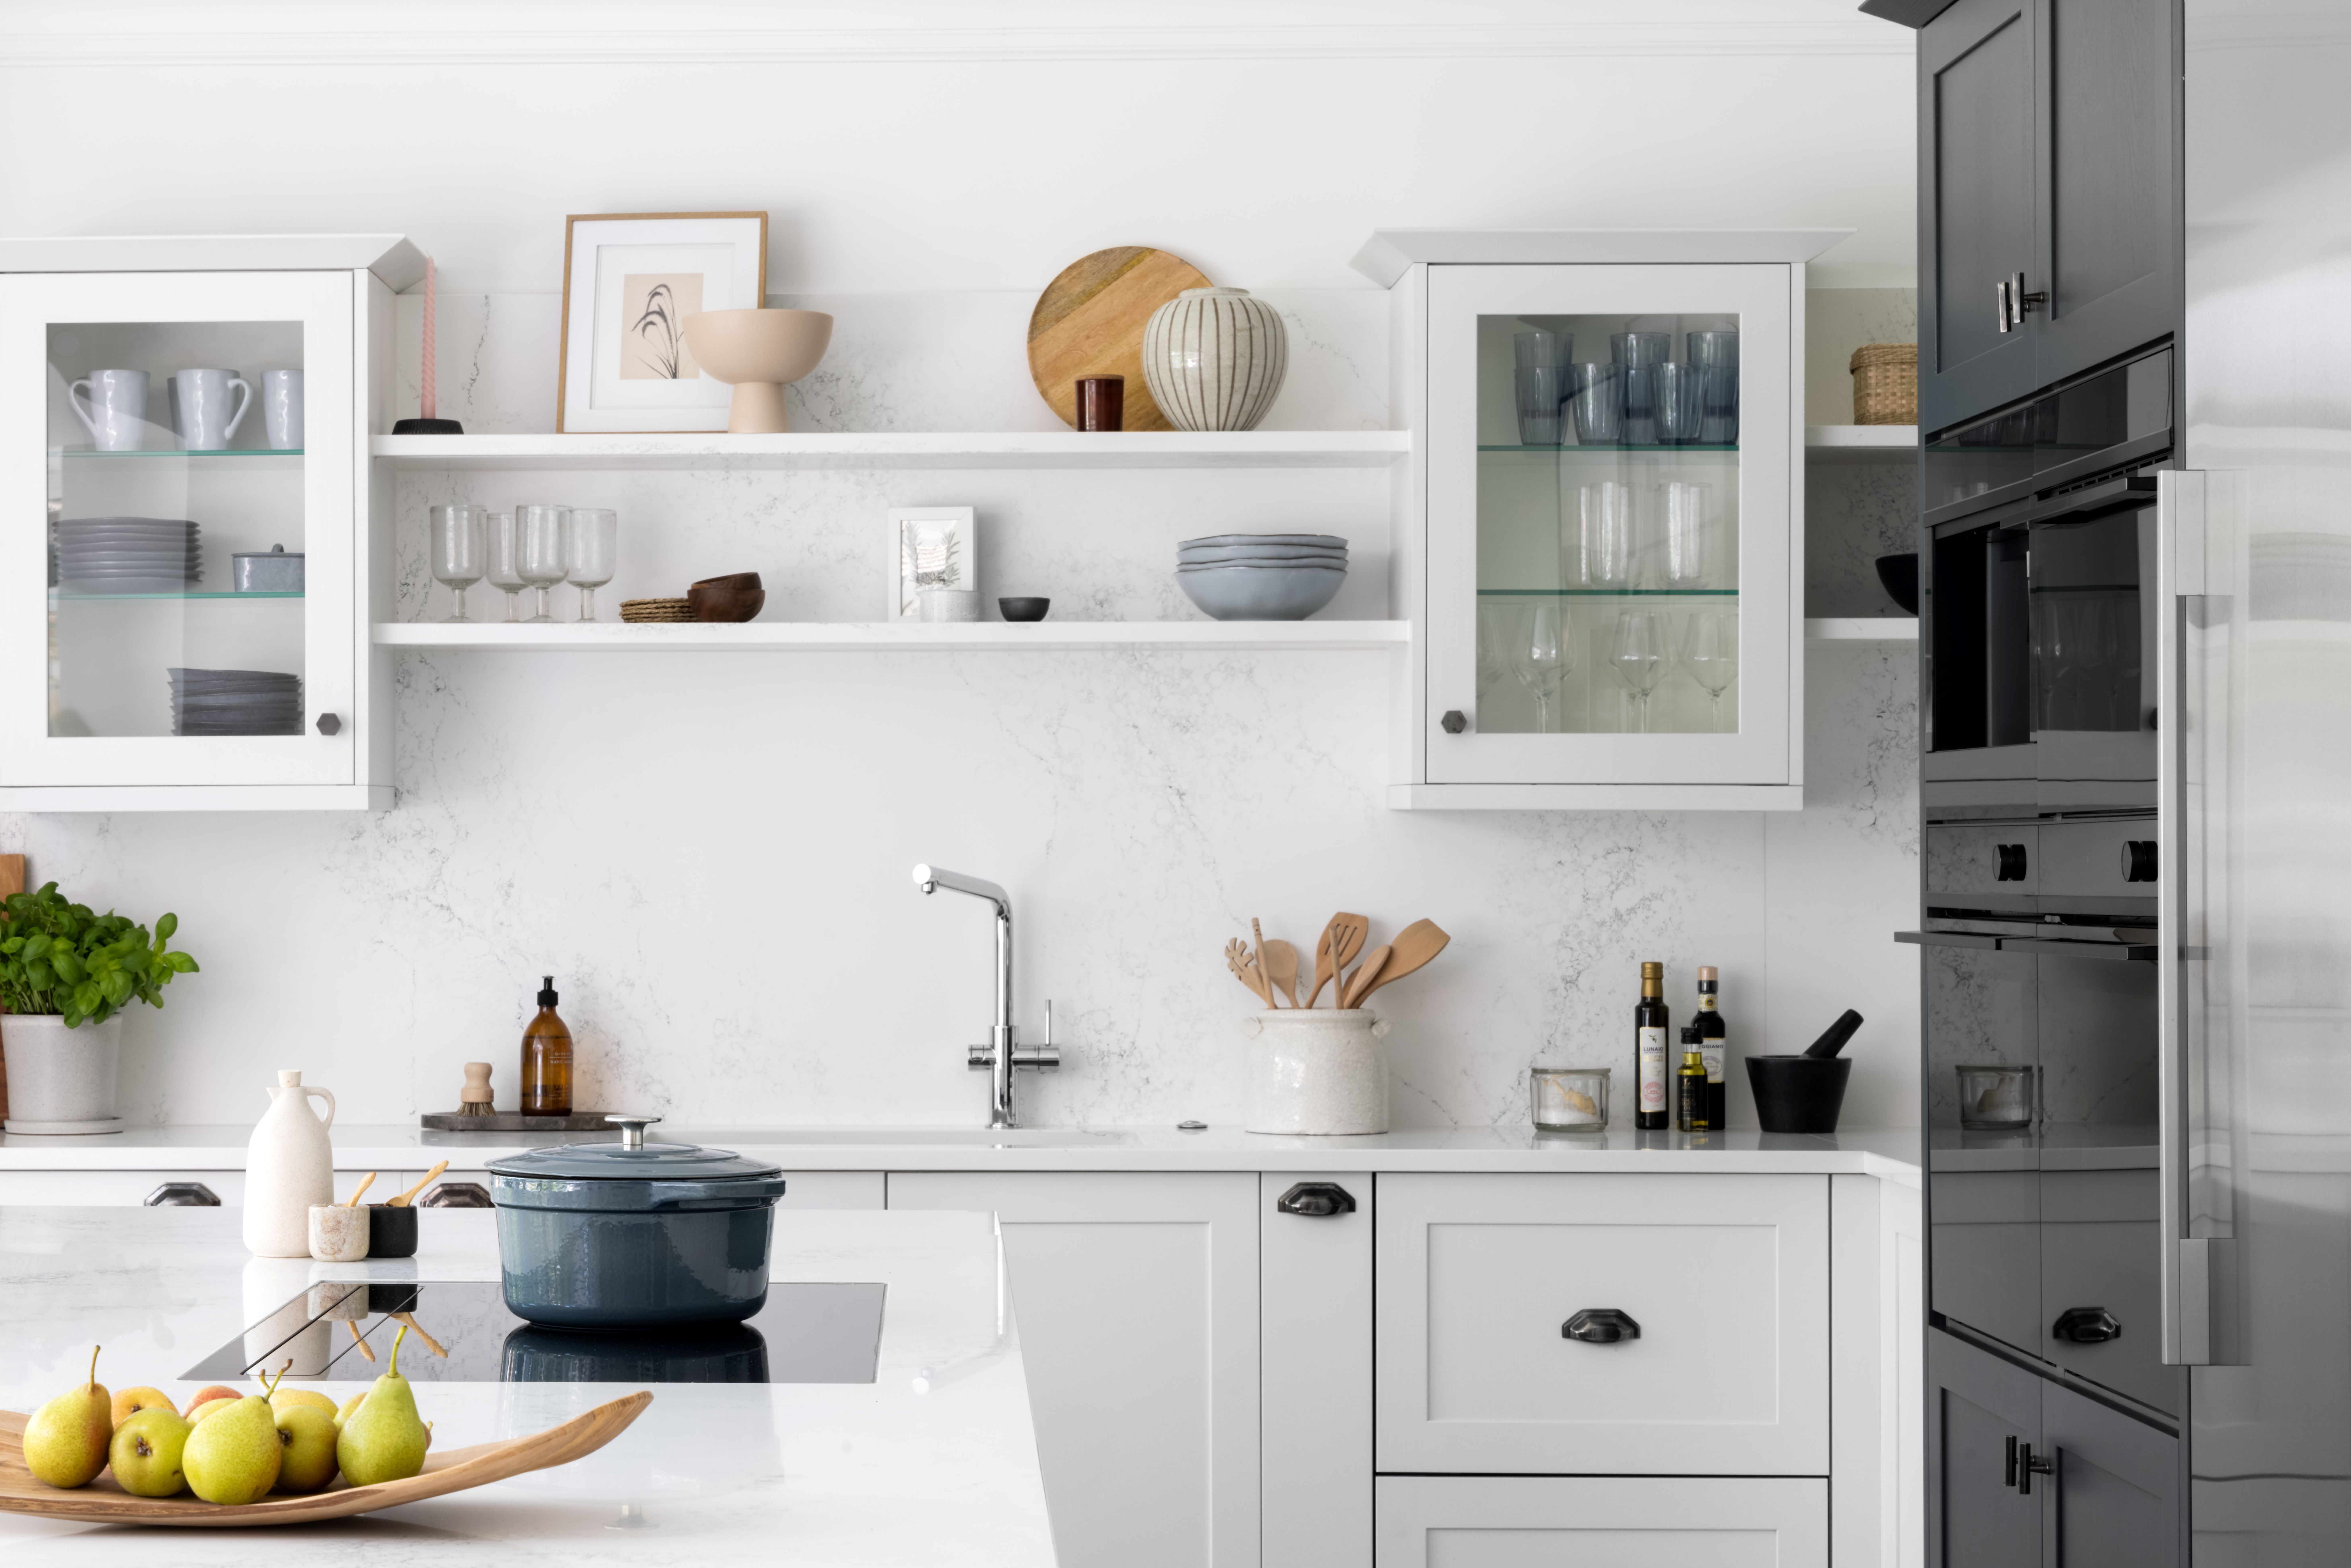 Whether it's wood or stone, concrete or composite that you are drawn to, there are lots of kitchen worktops to choose from. Follow this expert buyer's guide by interior stylist Maxine Brady